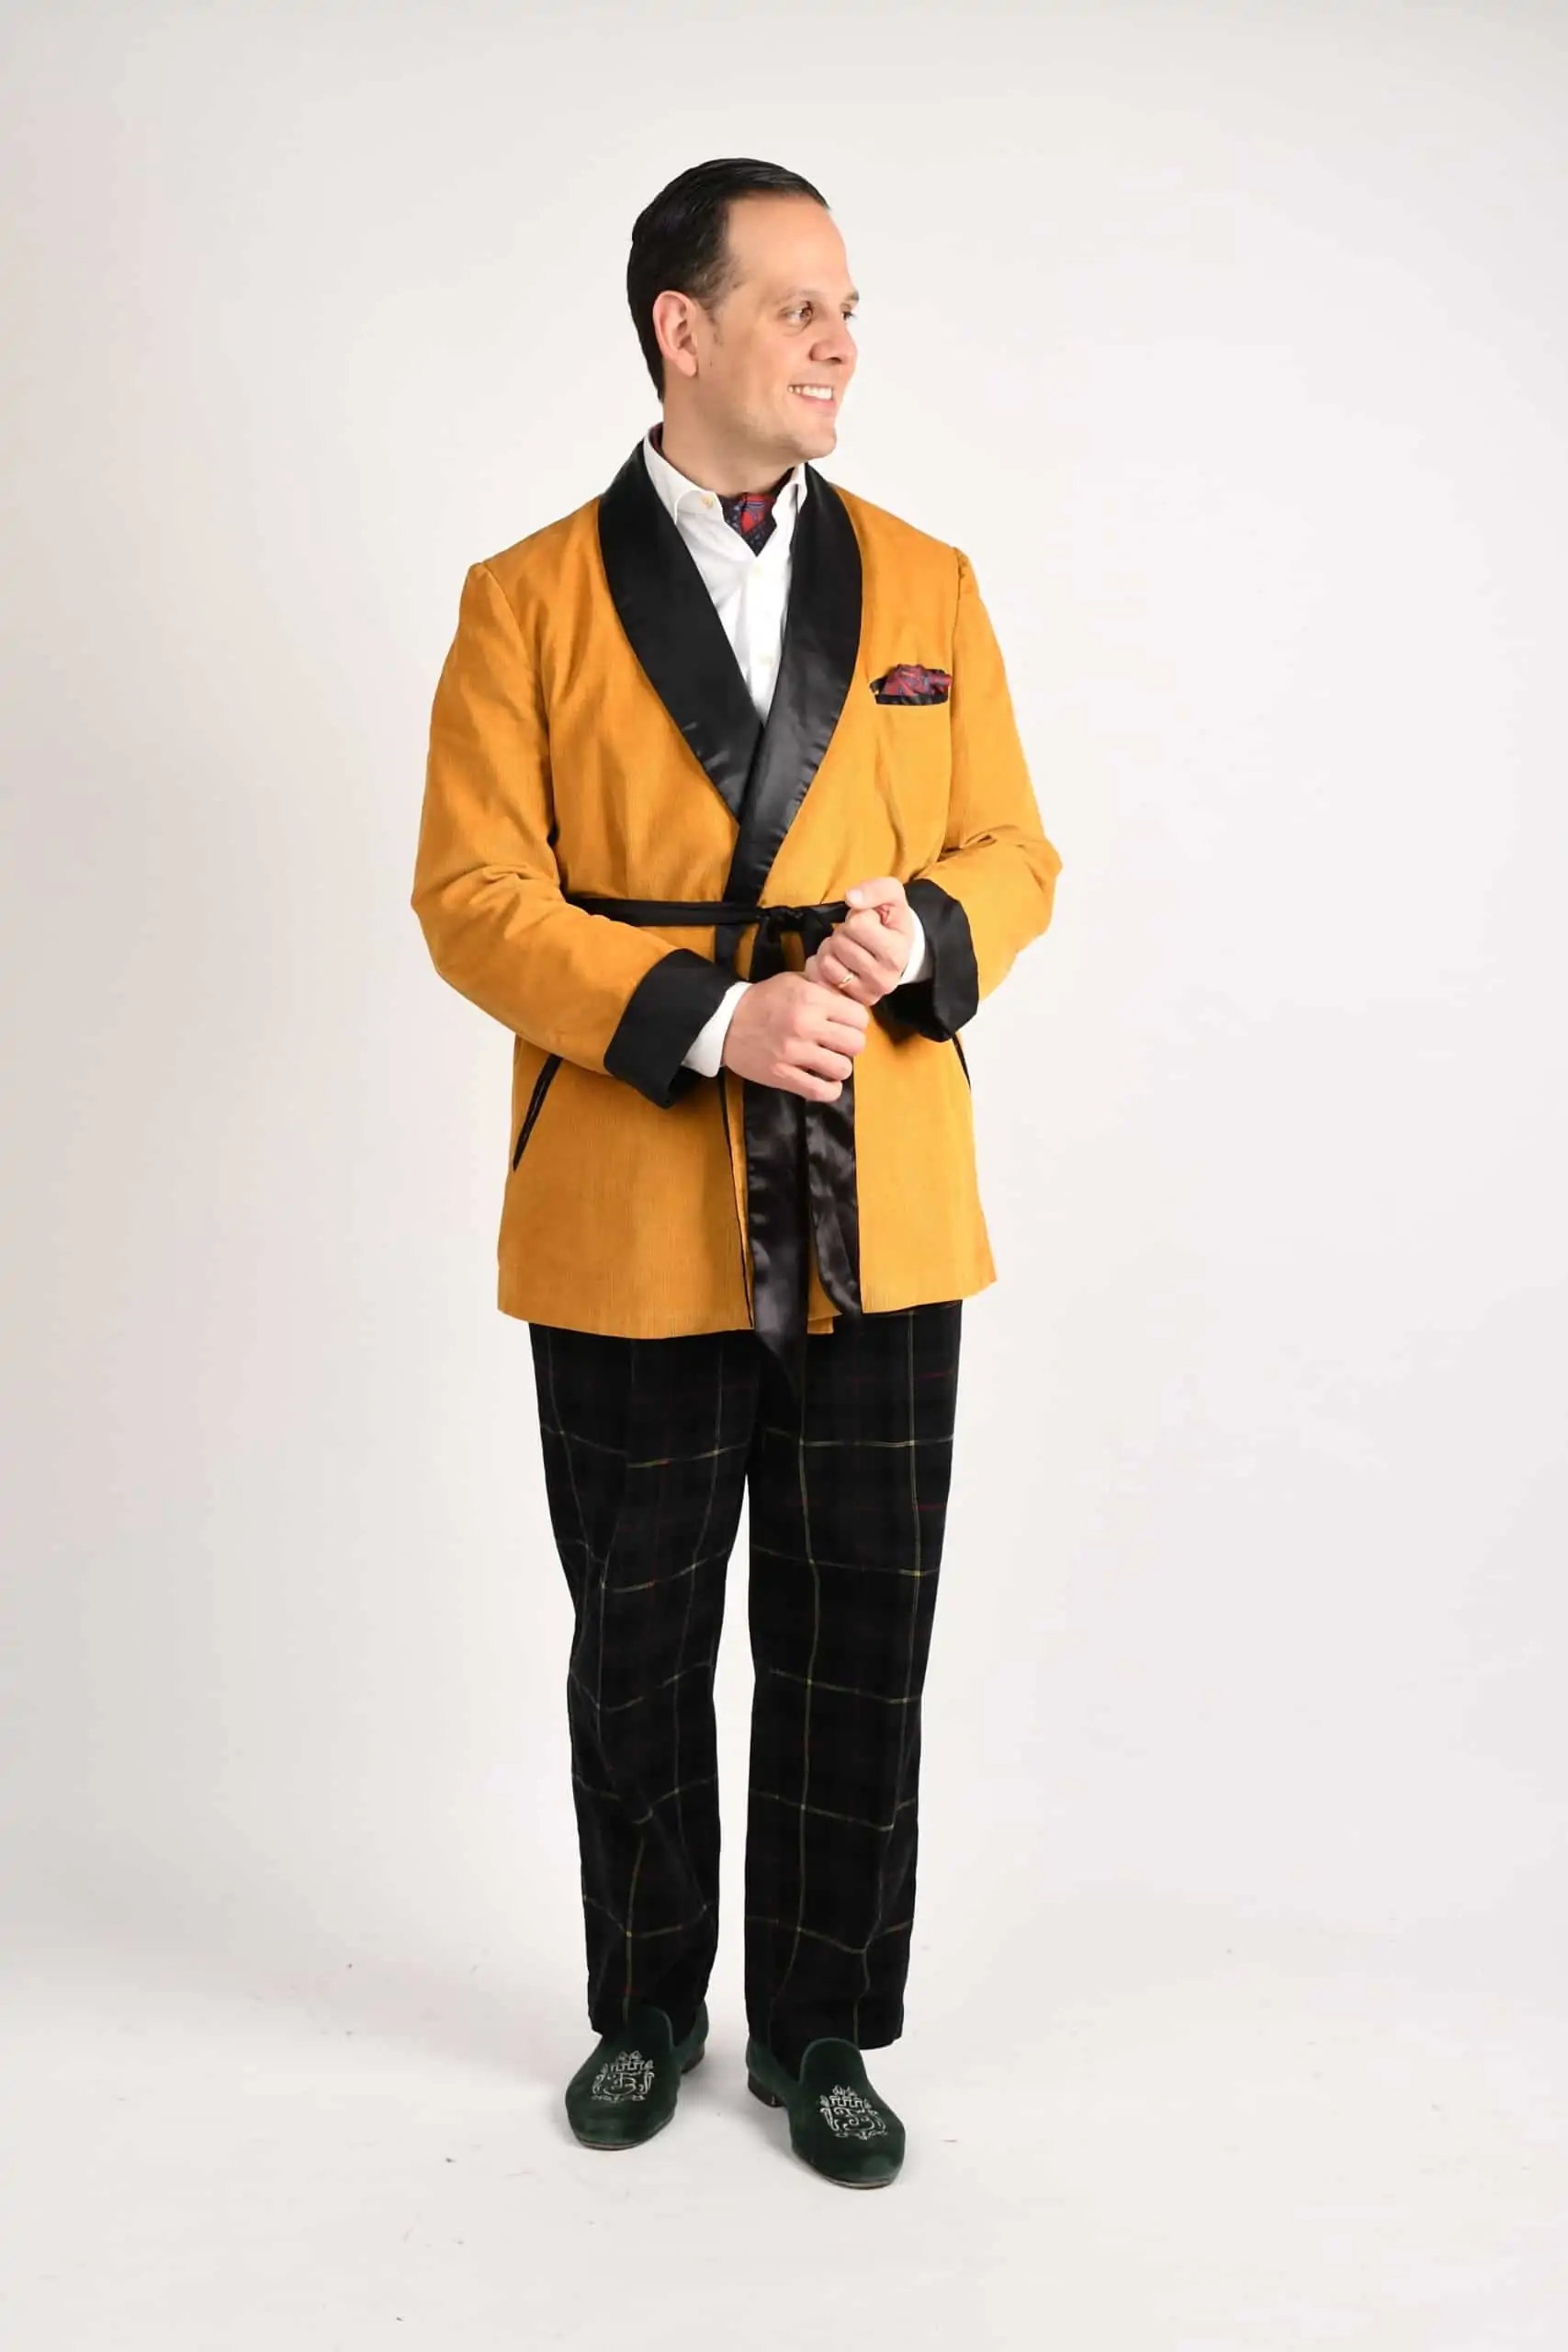 Raphael wearing a mustard yellow TV jacket and corduroy trousers